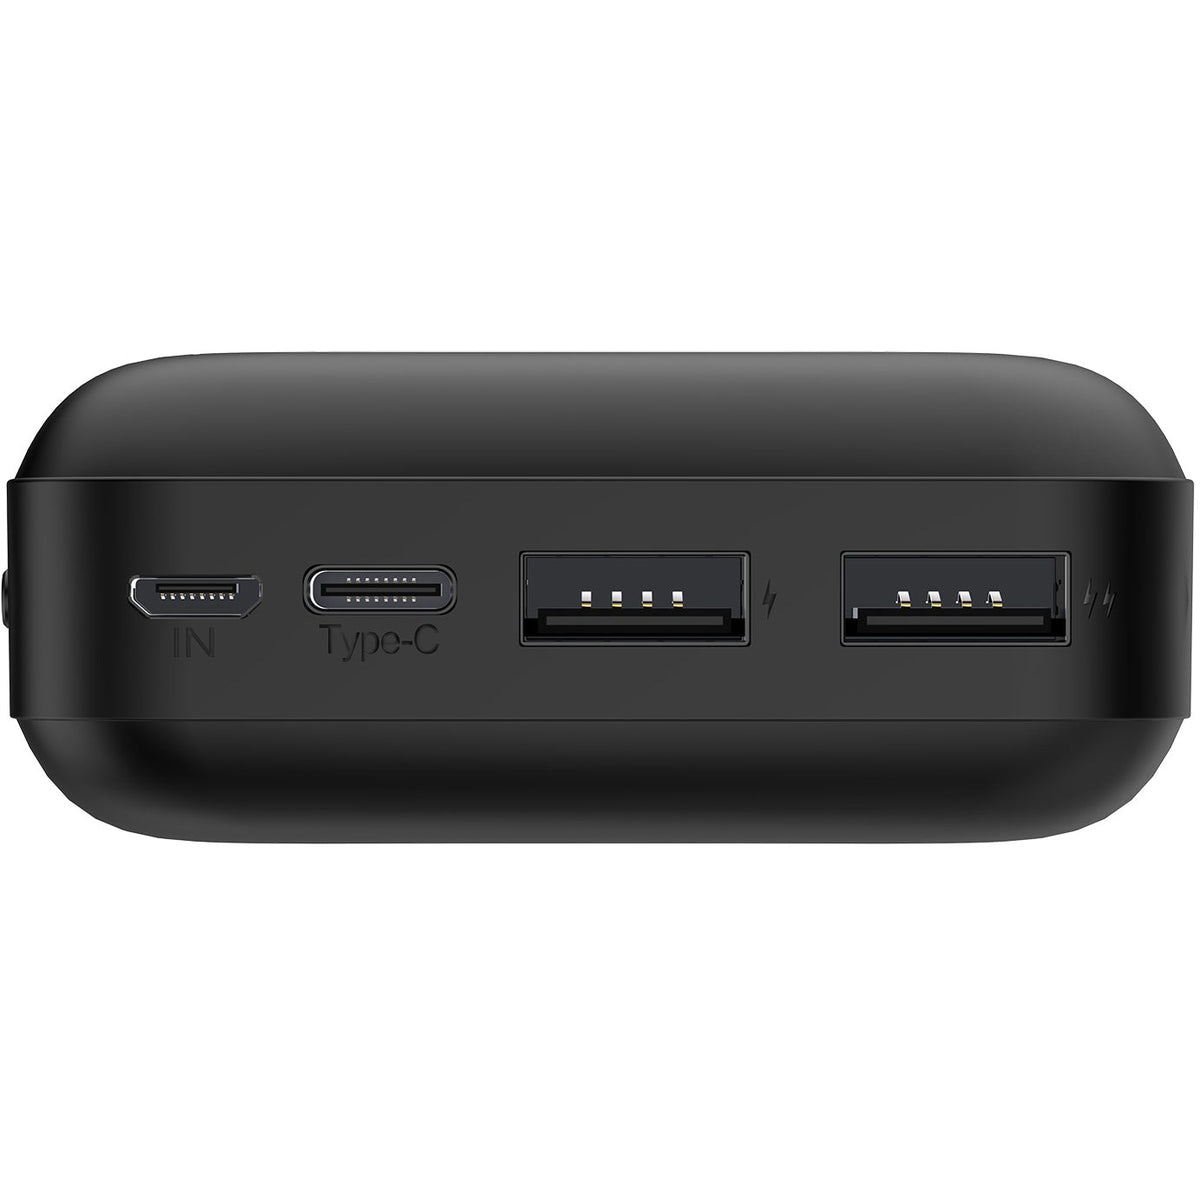 FX 3A 20000mAh Type - C Power Bank - Black | 047466 from FX - DID Electrical